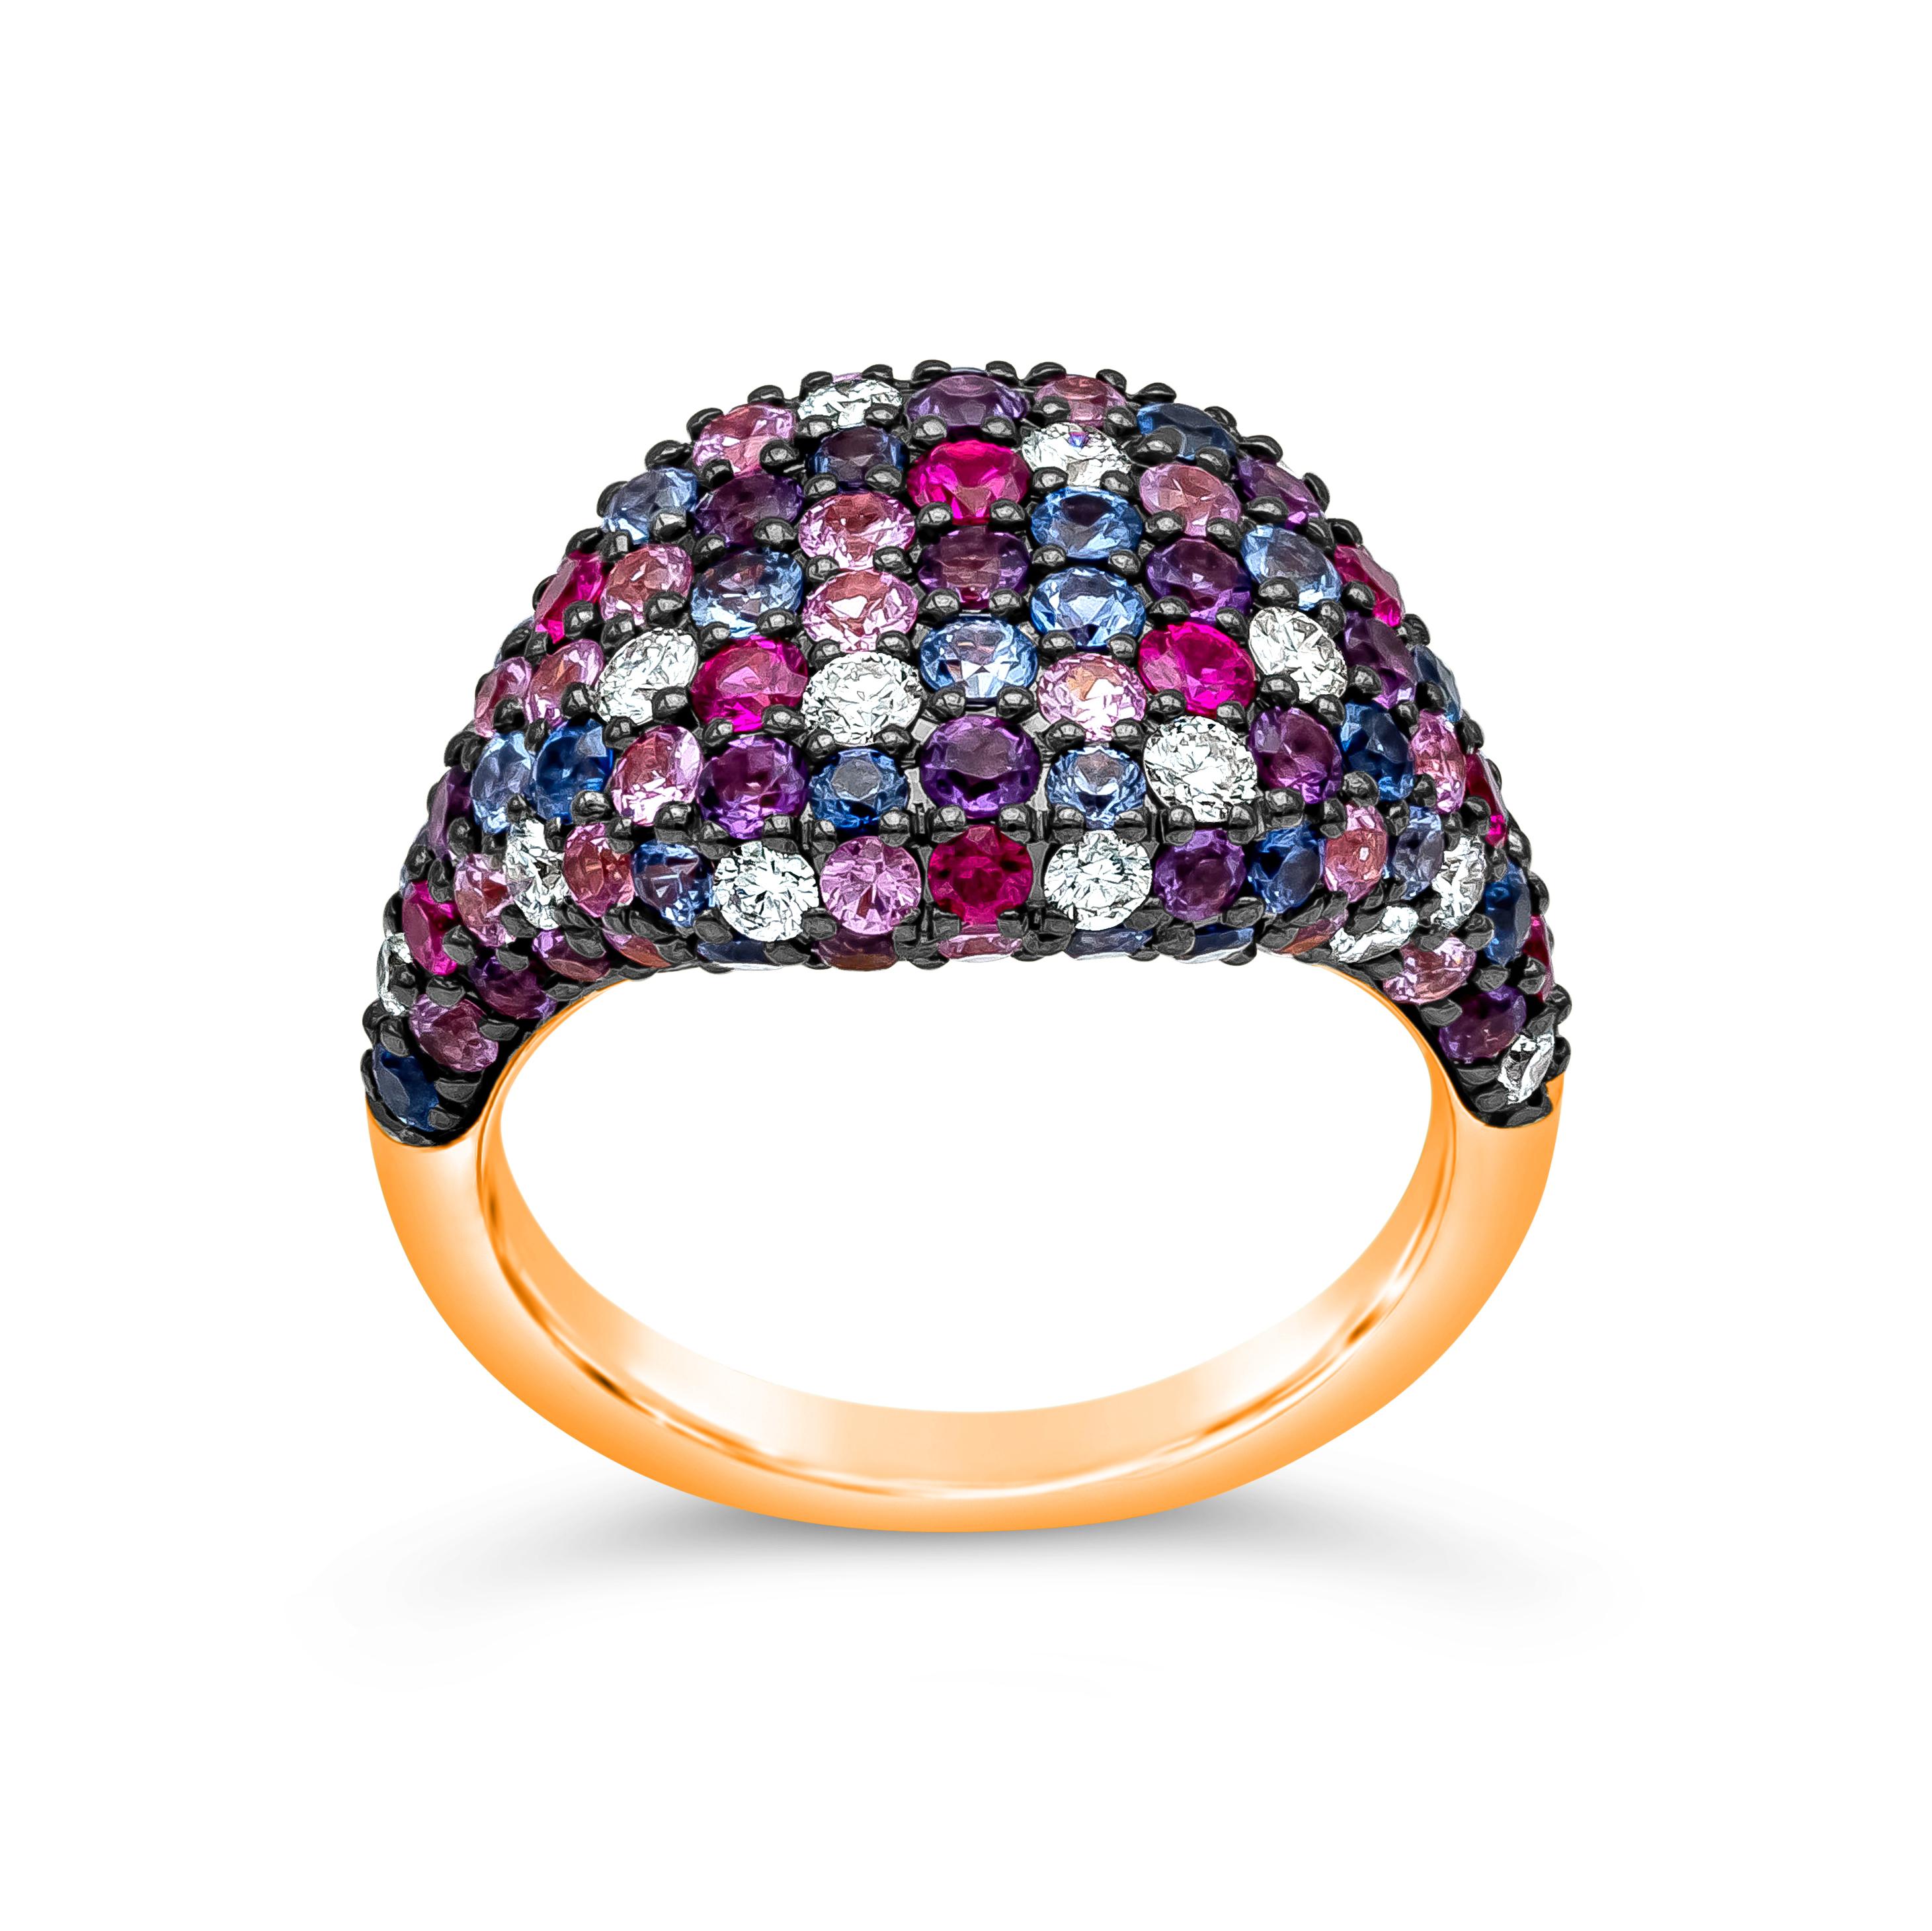 Contemporary Multi-Gemstone and Diamonds Fashion Ring, 3.72 Carat Total For Sale